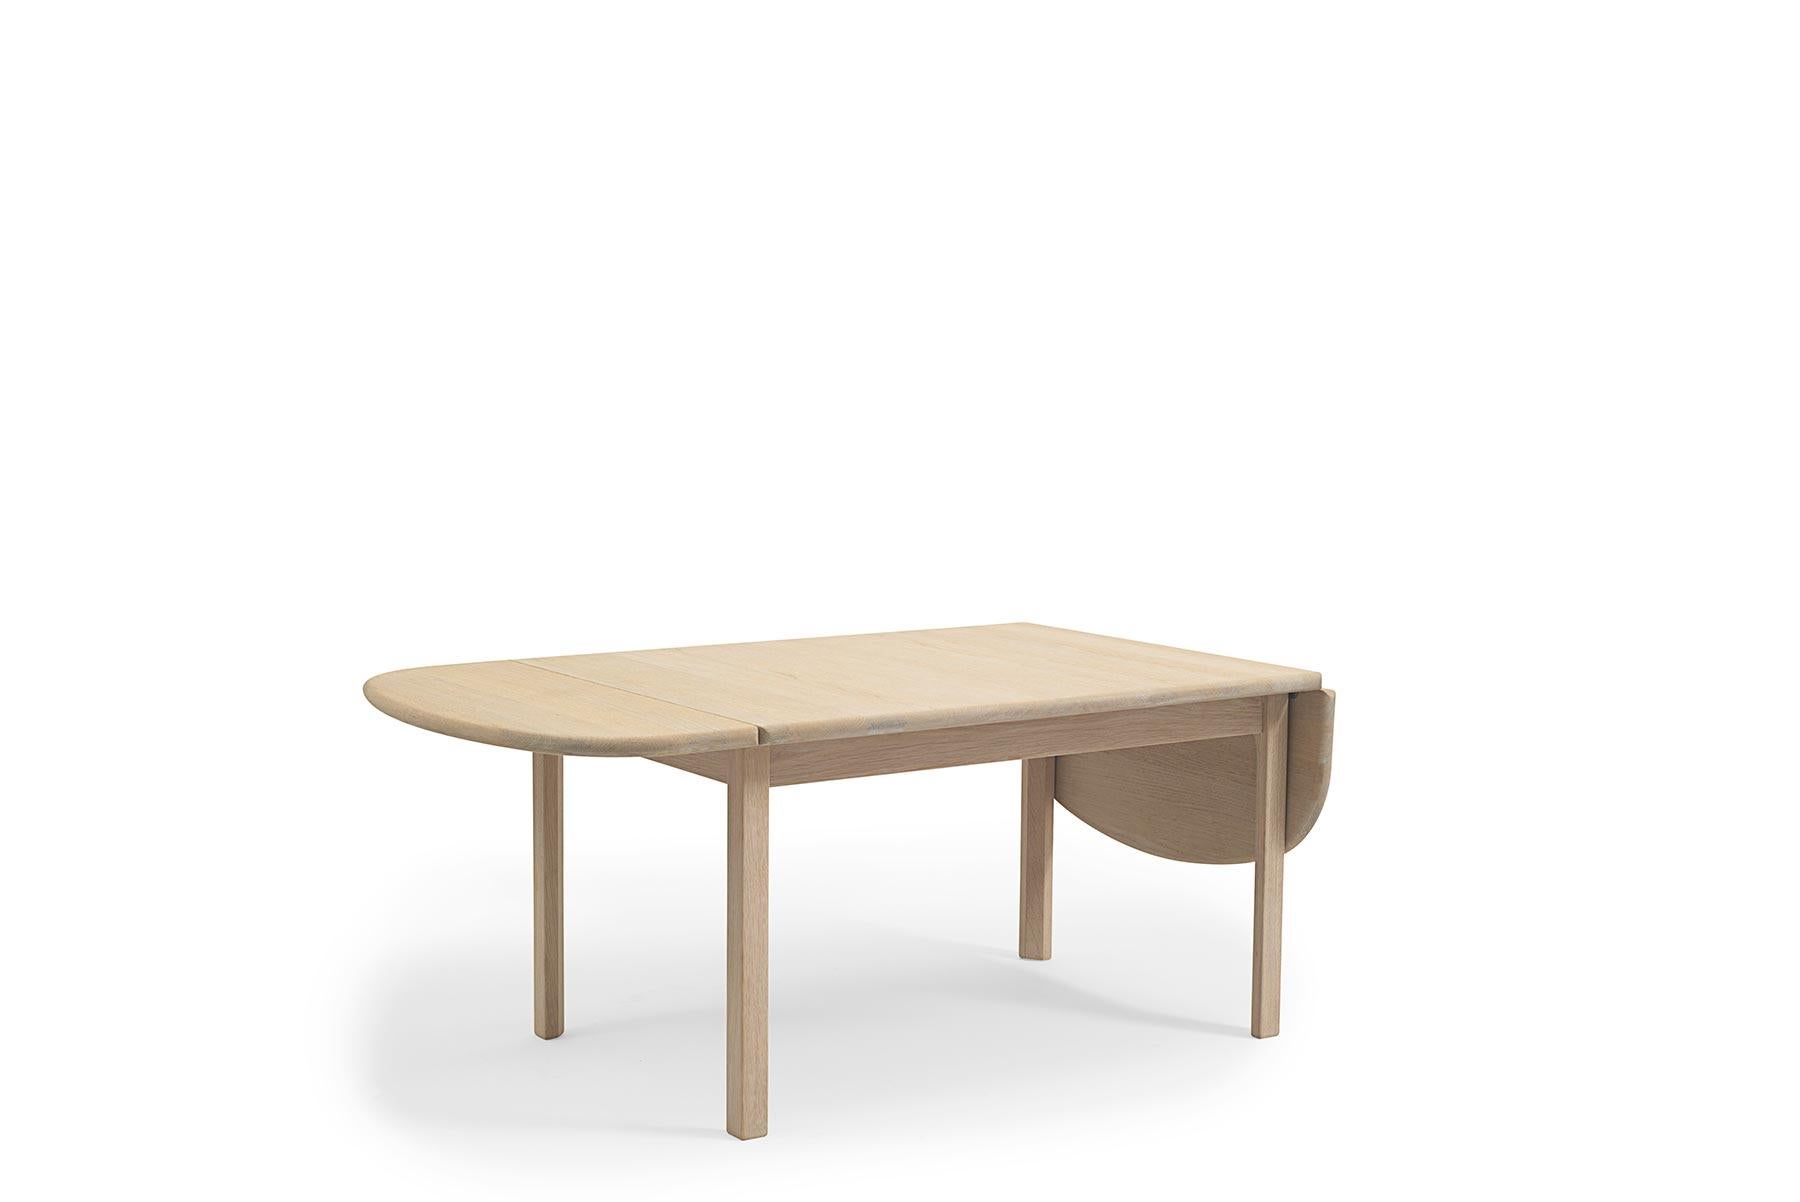 Designed by Hans Wegner for GETAMA in 1980, the 82/85 coffee table features unparalleled craftsmanship. Table offers two drop leaves which extend the table surface. This table is hand built at GETAMA’s factory in Gedsted, Denmark by skilled